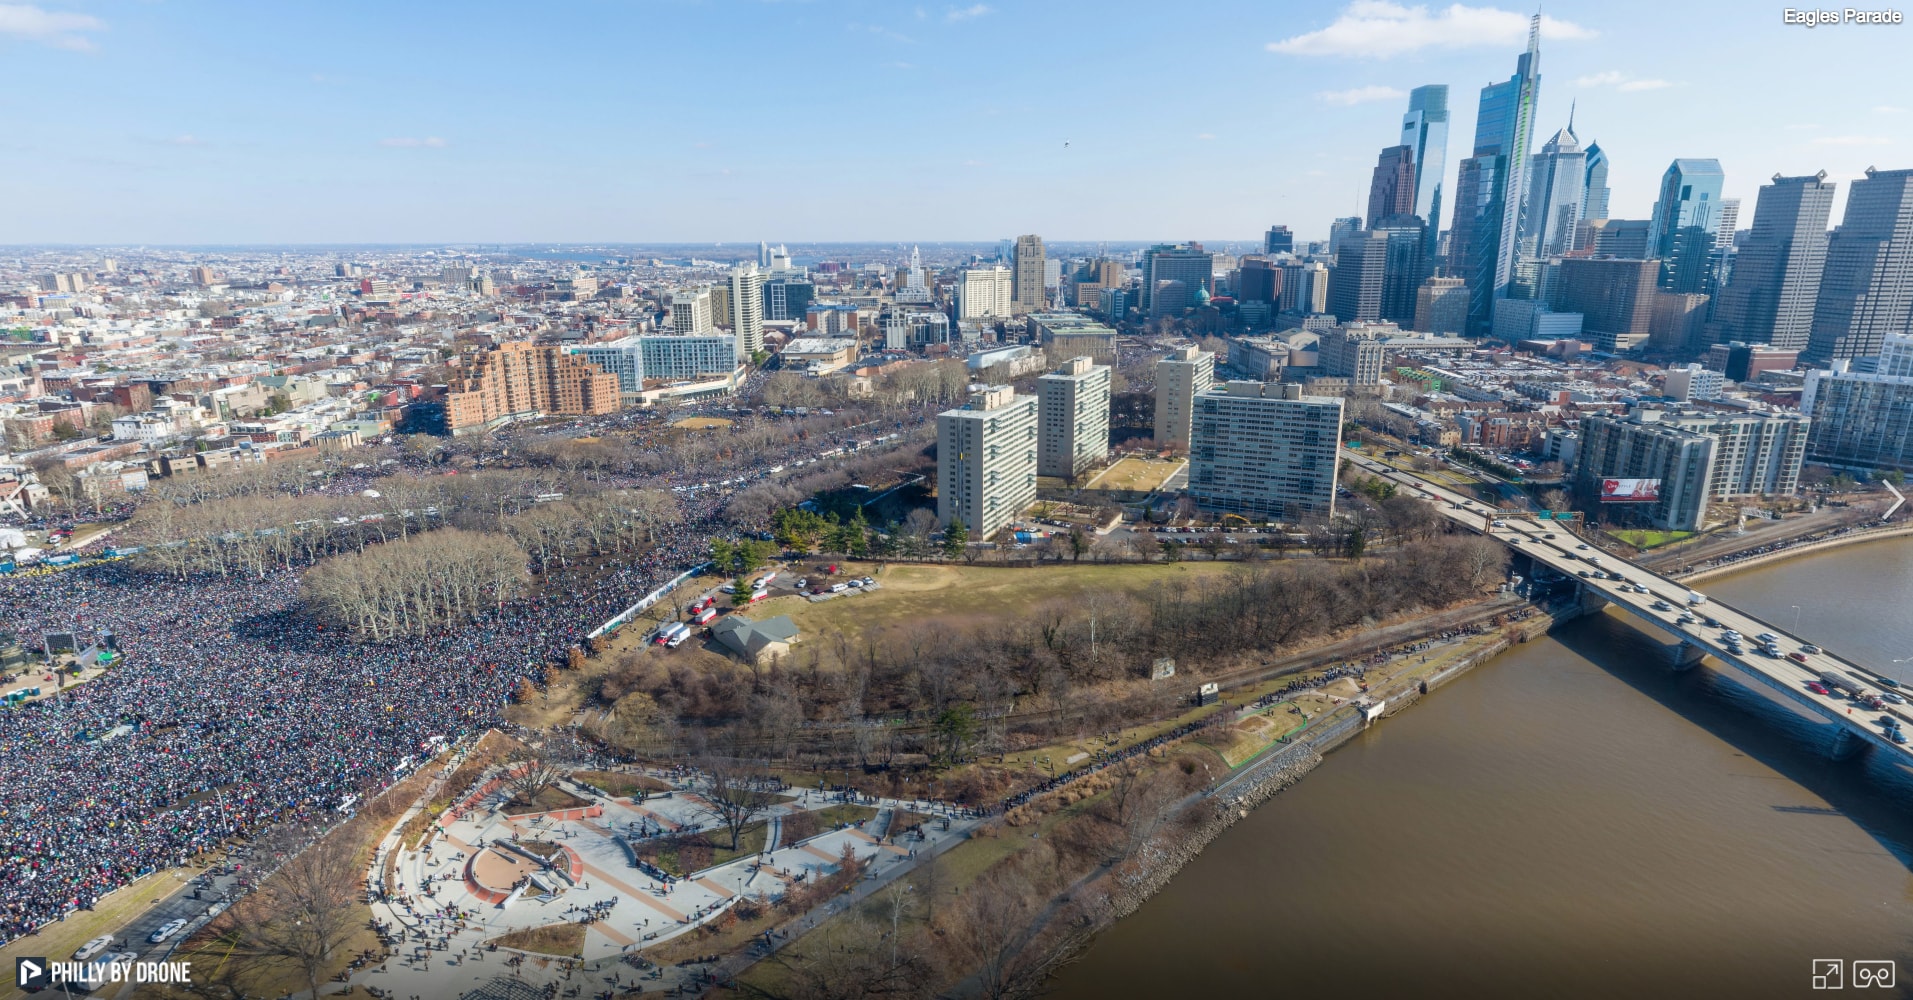 An aerial shot of Philadelphia, with the Schuylkill River and high-rise buildings as backdrop.